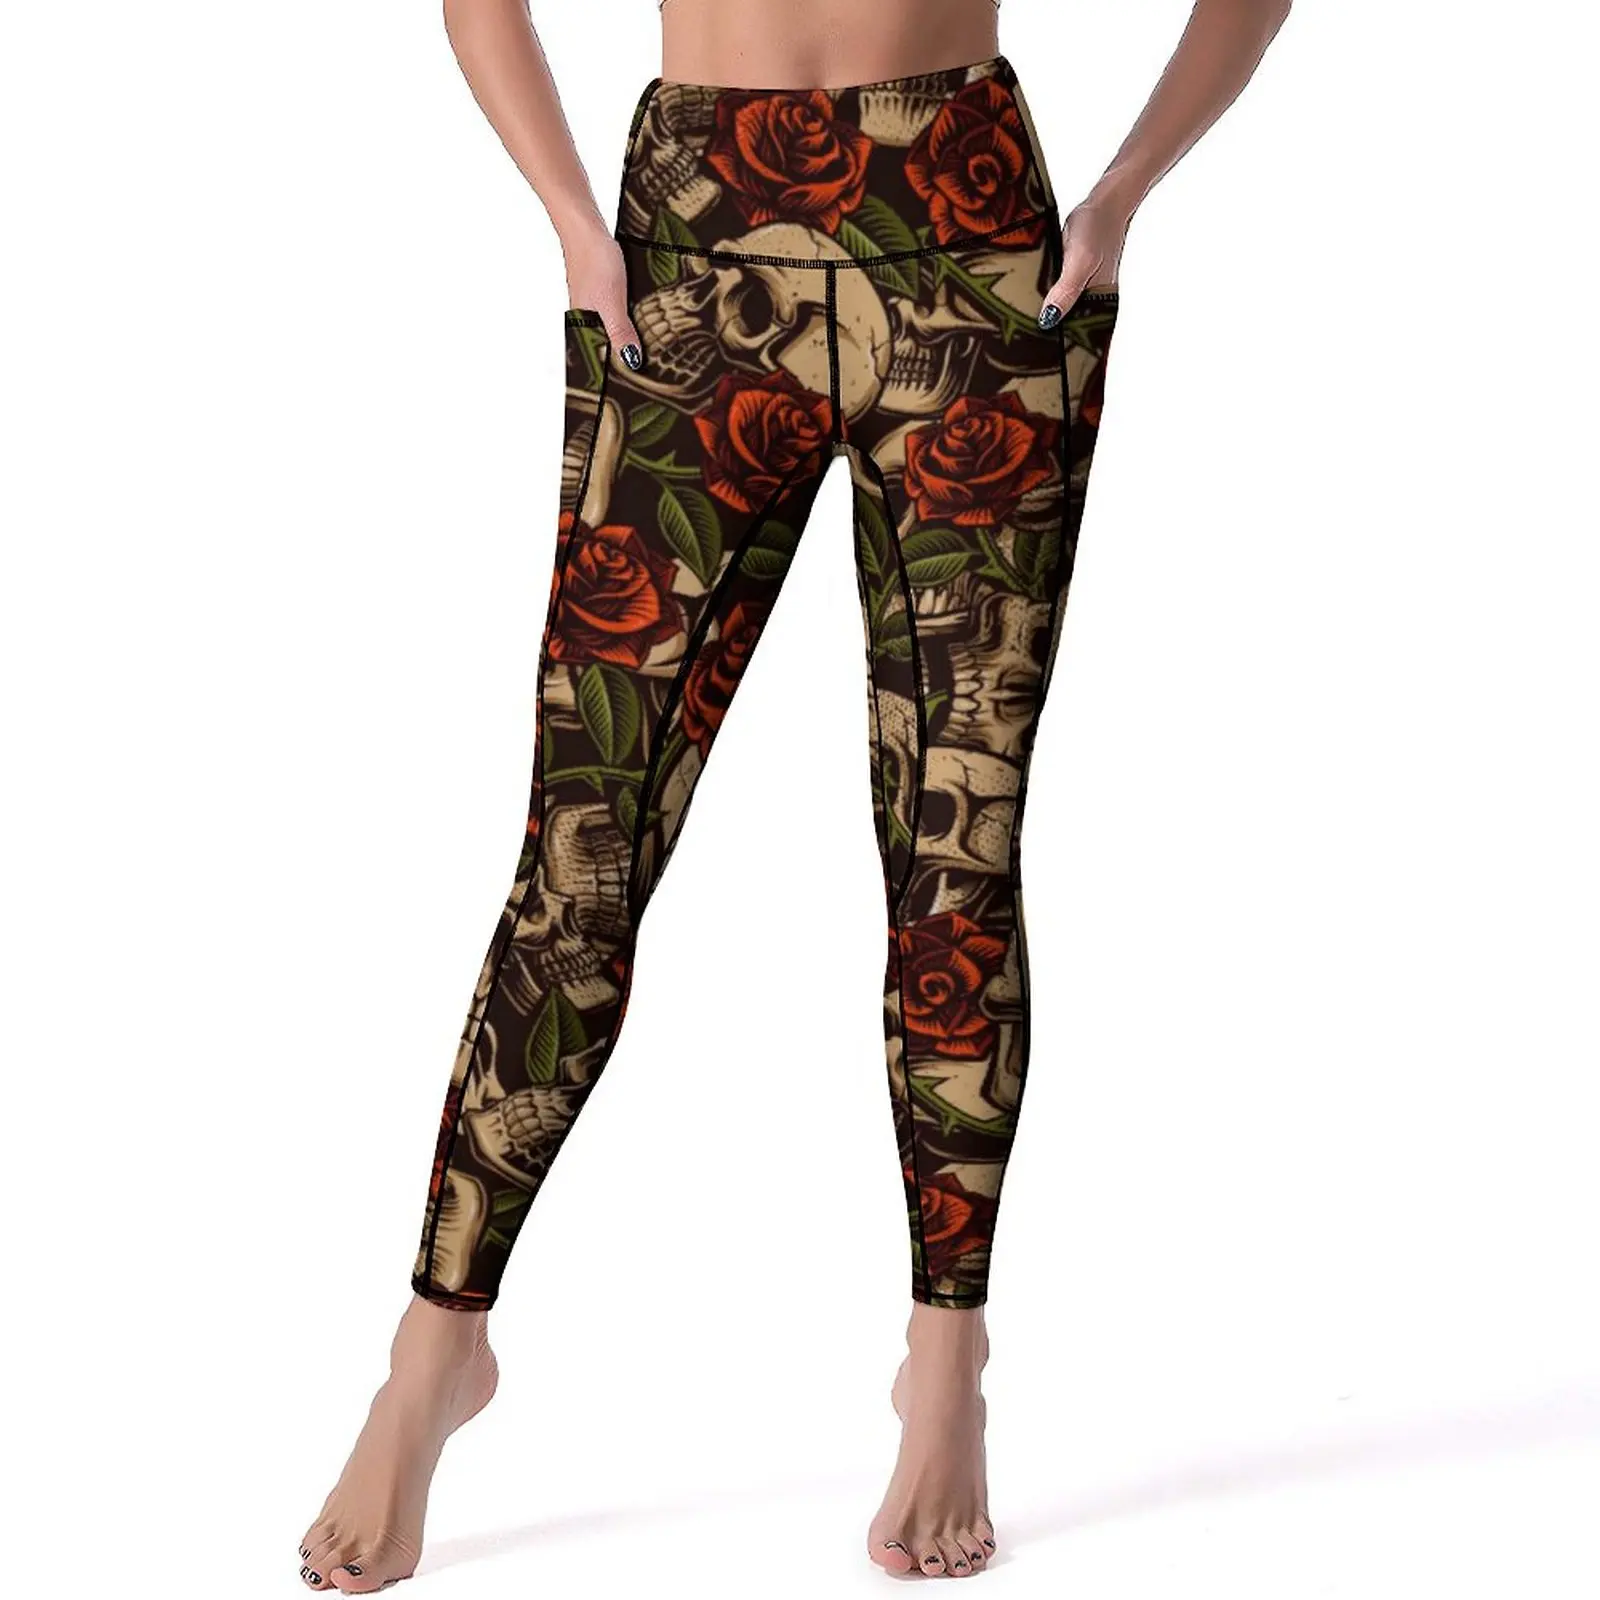 

Suger Skull Print Leggings Sexy Red Roses Push Up Yoga Pants Fashion Quick-Dry Leggins With Pockets Custom Fitness Sports Tights